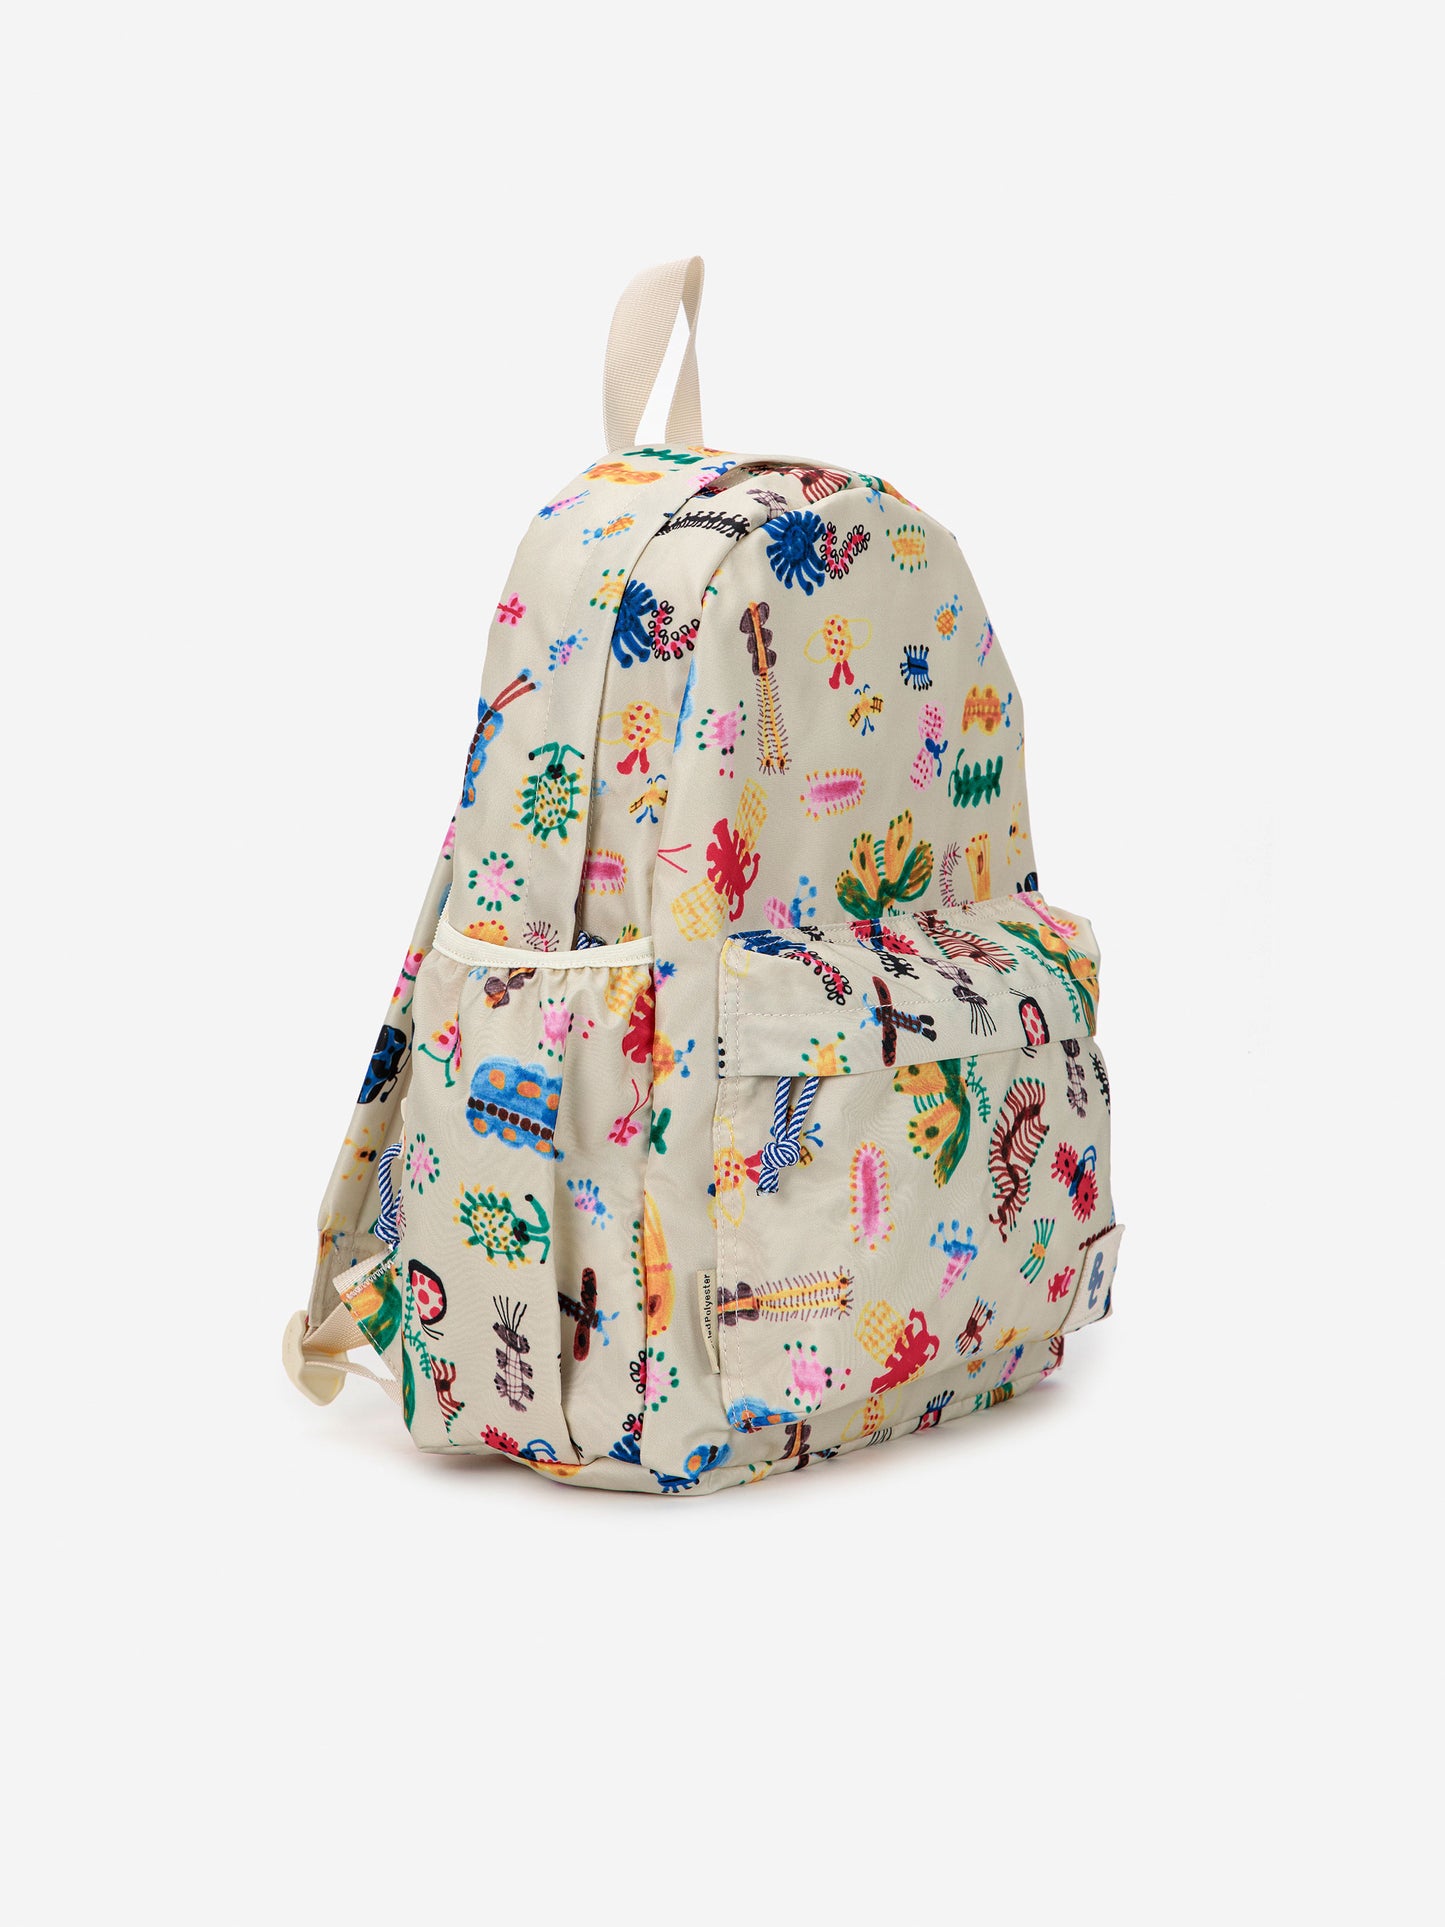 Funny Insects All Over backpack